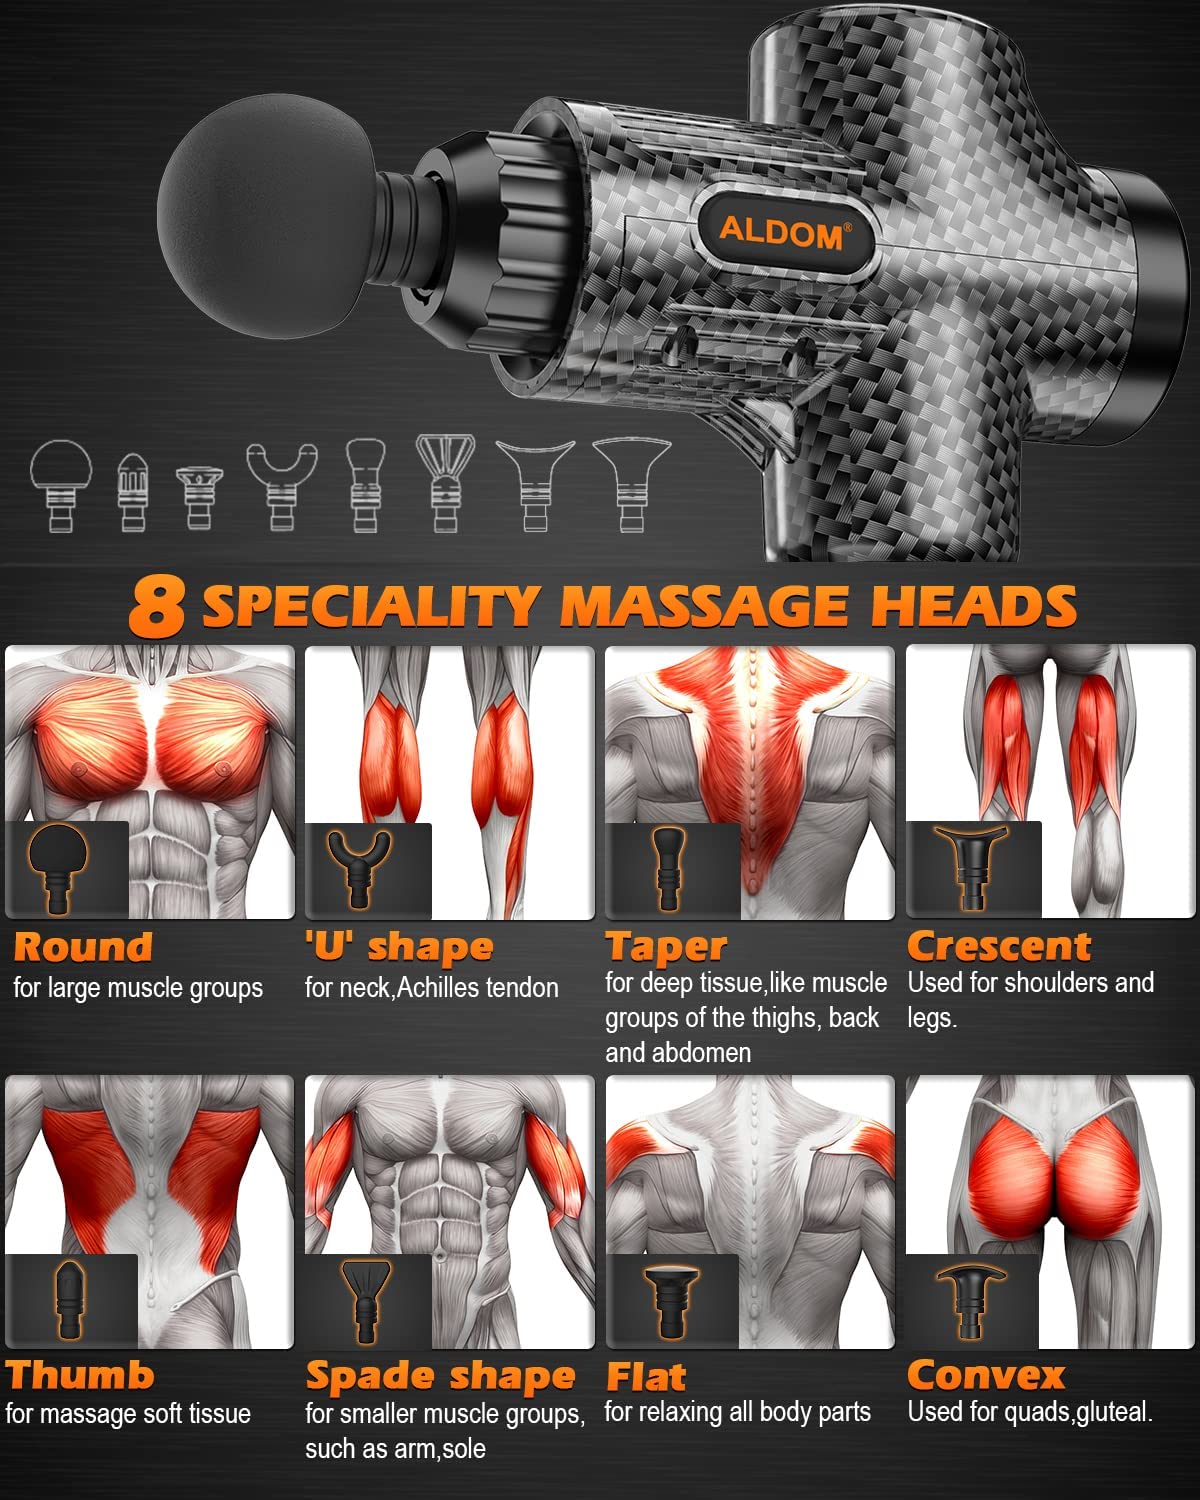 Massage Gun Deep Tissue, Muscle Percussion Massager with 30 Speeds, Quiet Handheld  Massagers with LCD Touch